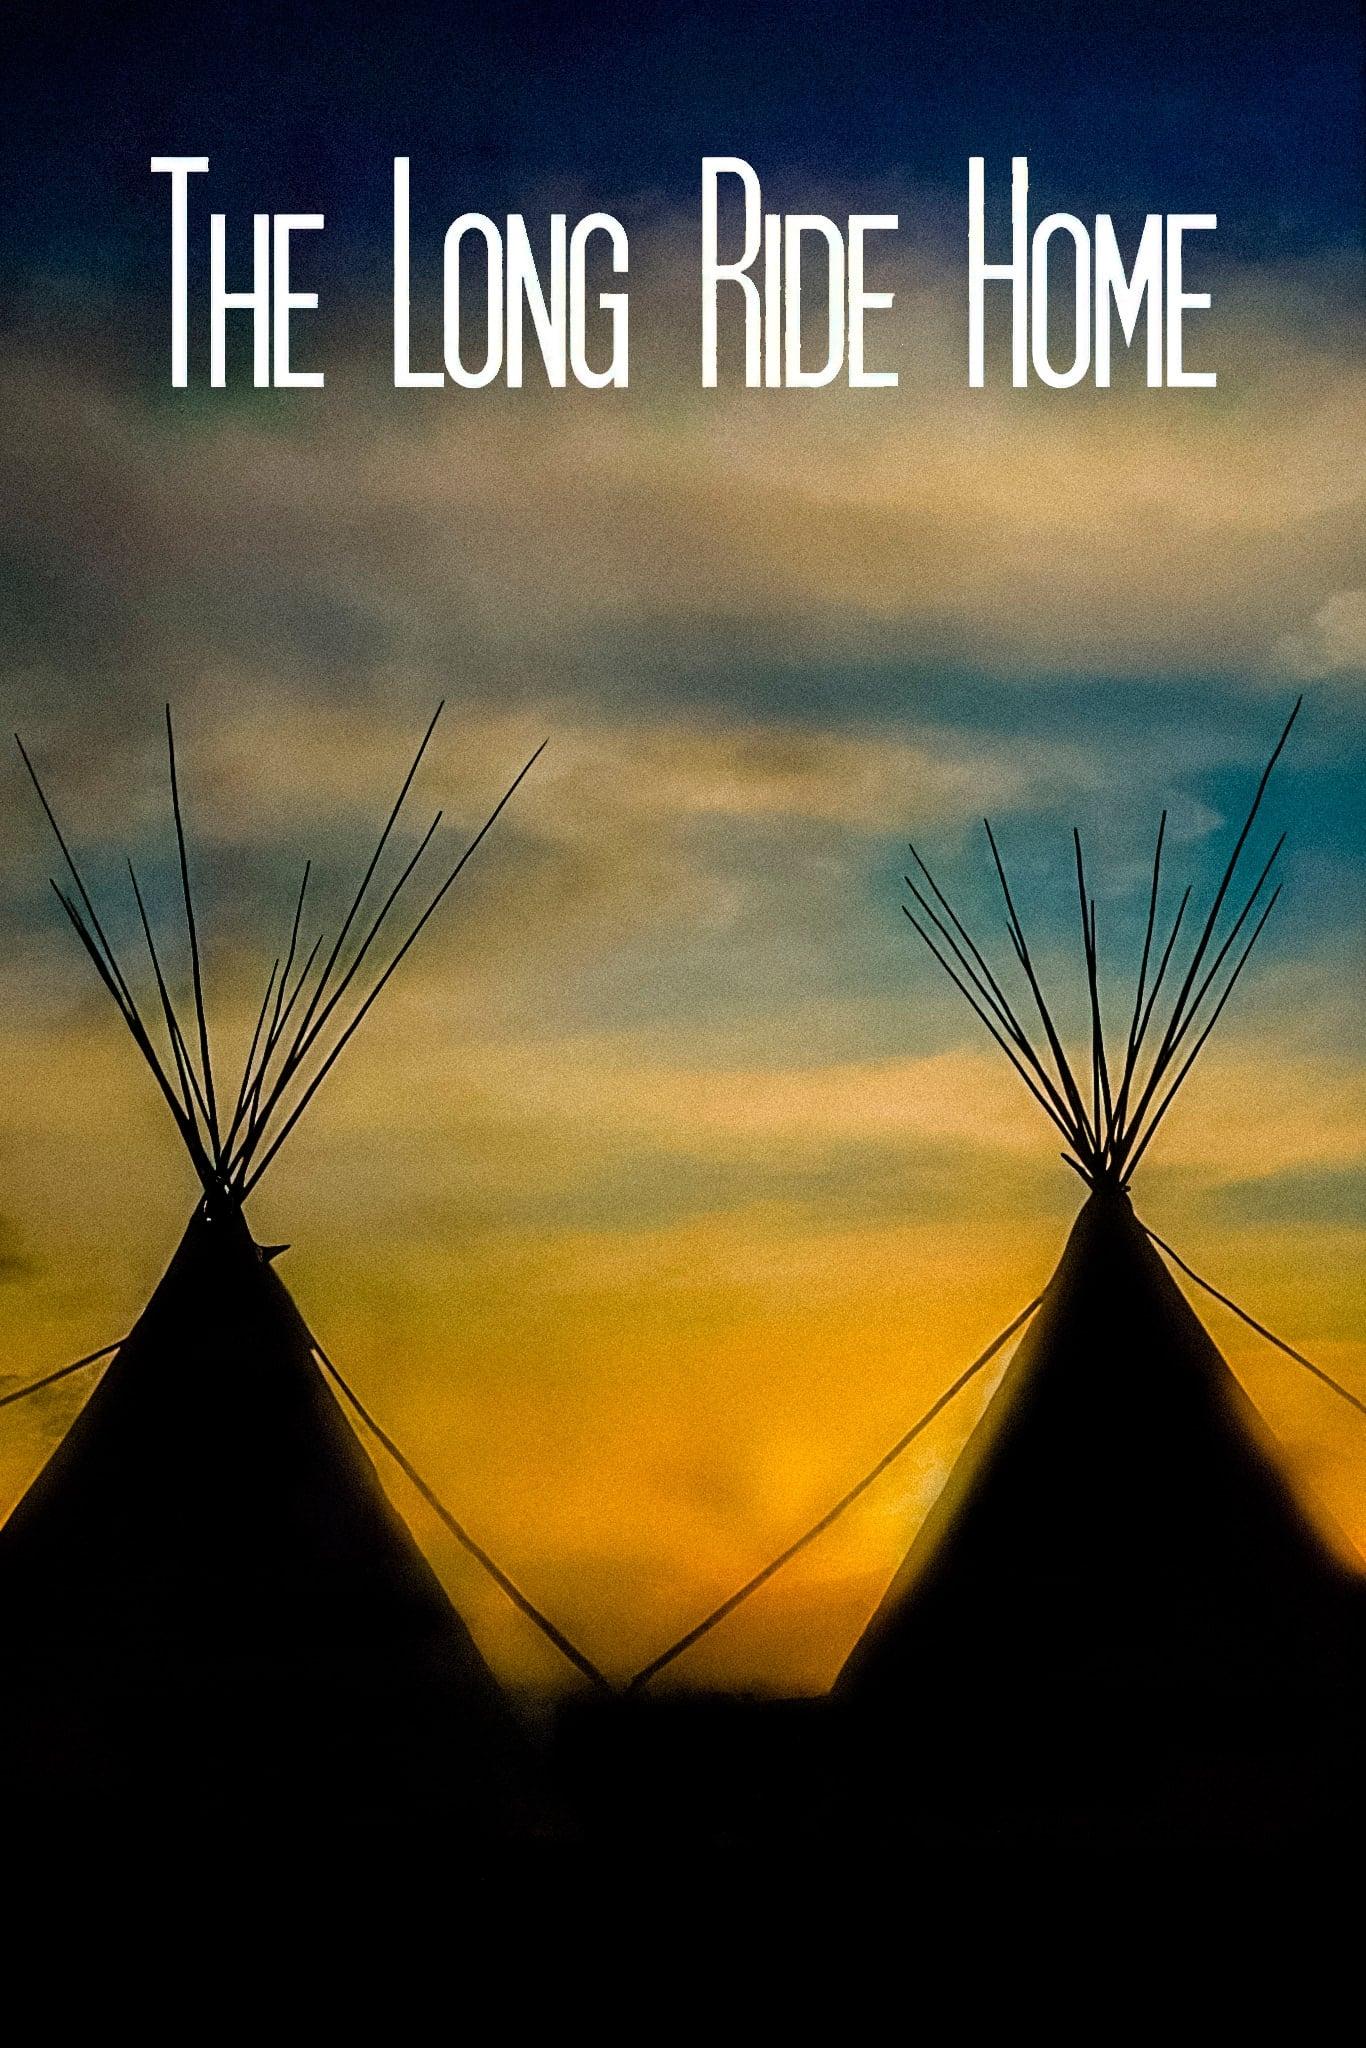 The Long Ride Home poster